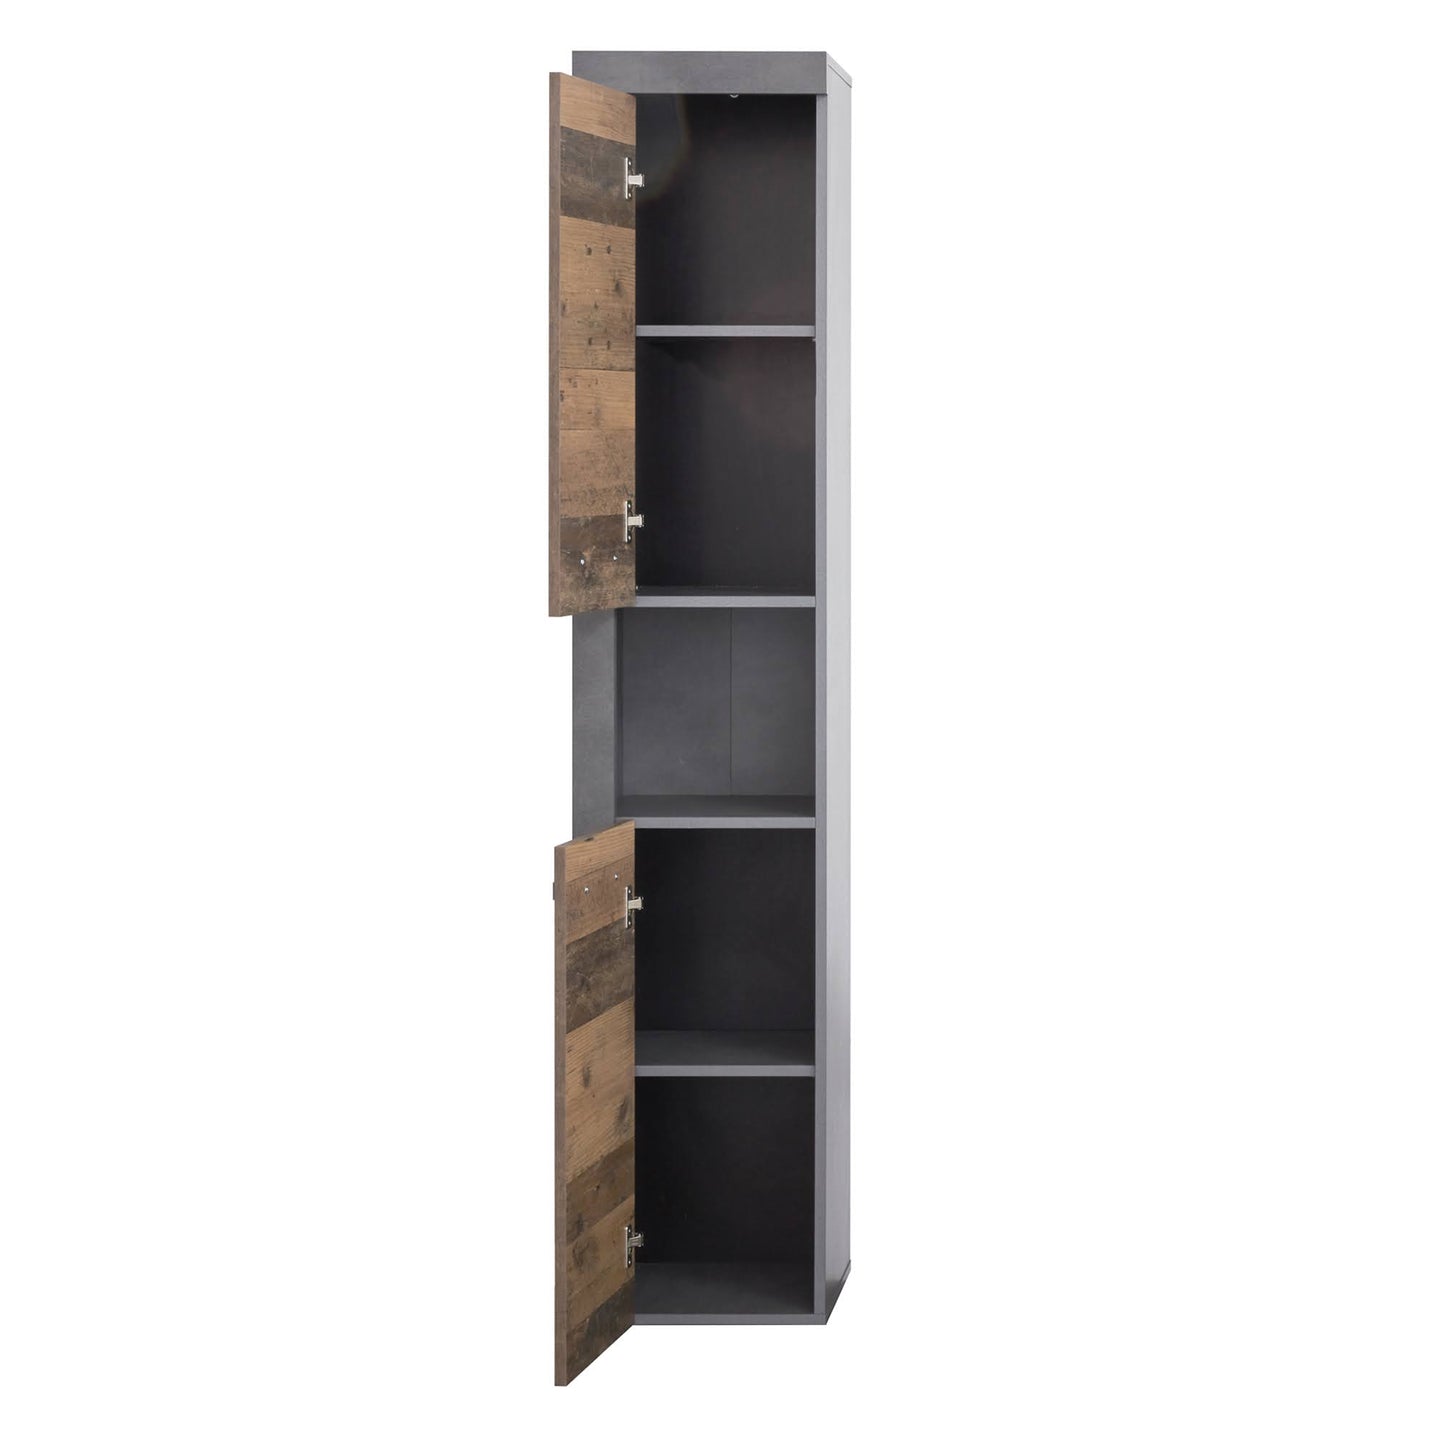 Nancy's Chicalote Bathroom Cabinet - Storage Cabinet - Brown and Gray - 33 x 184 x 31 cm